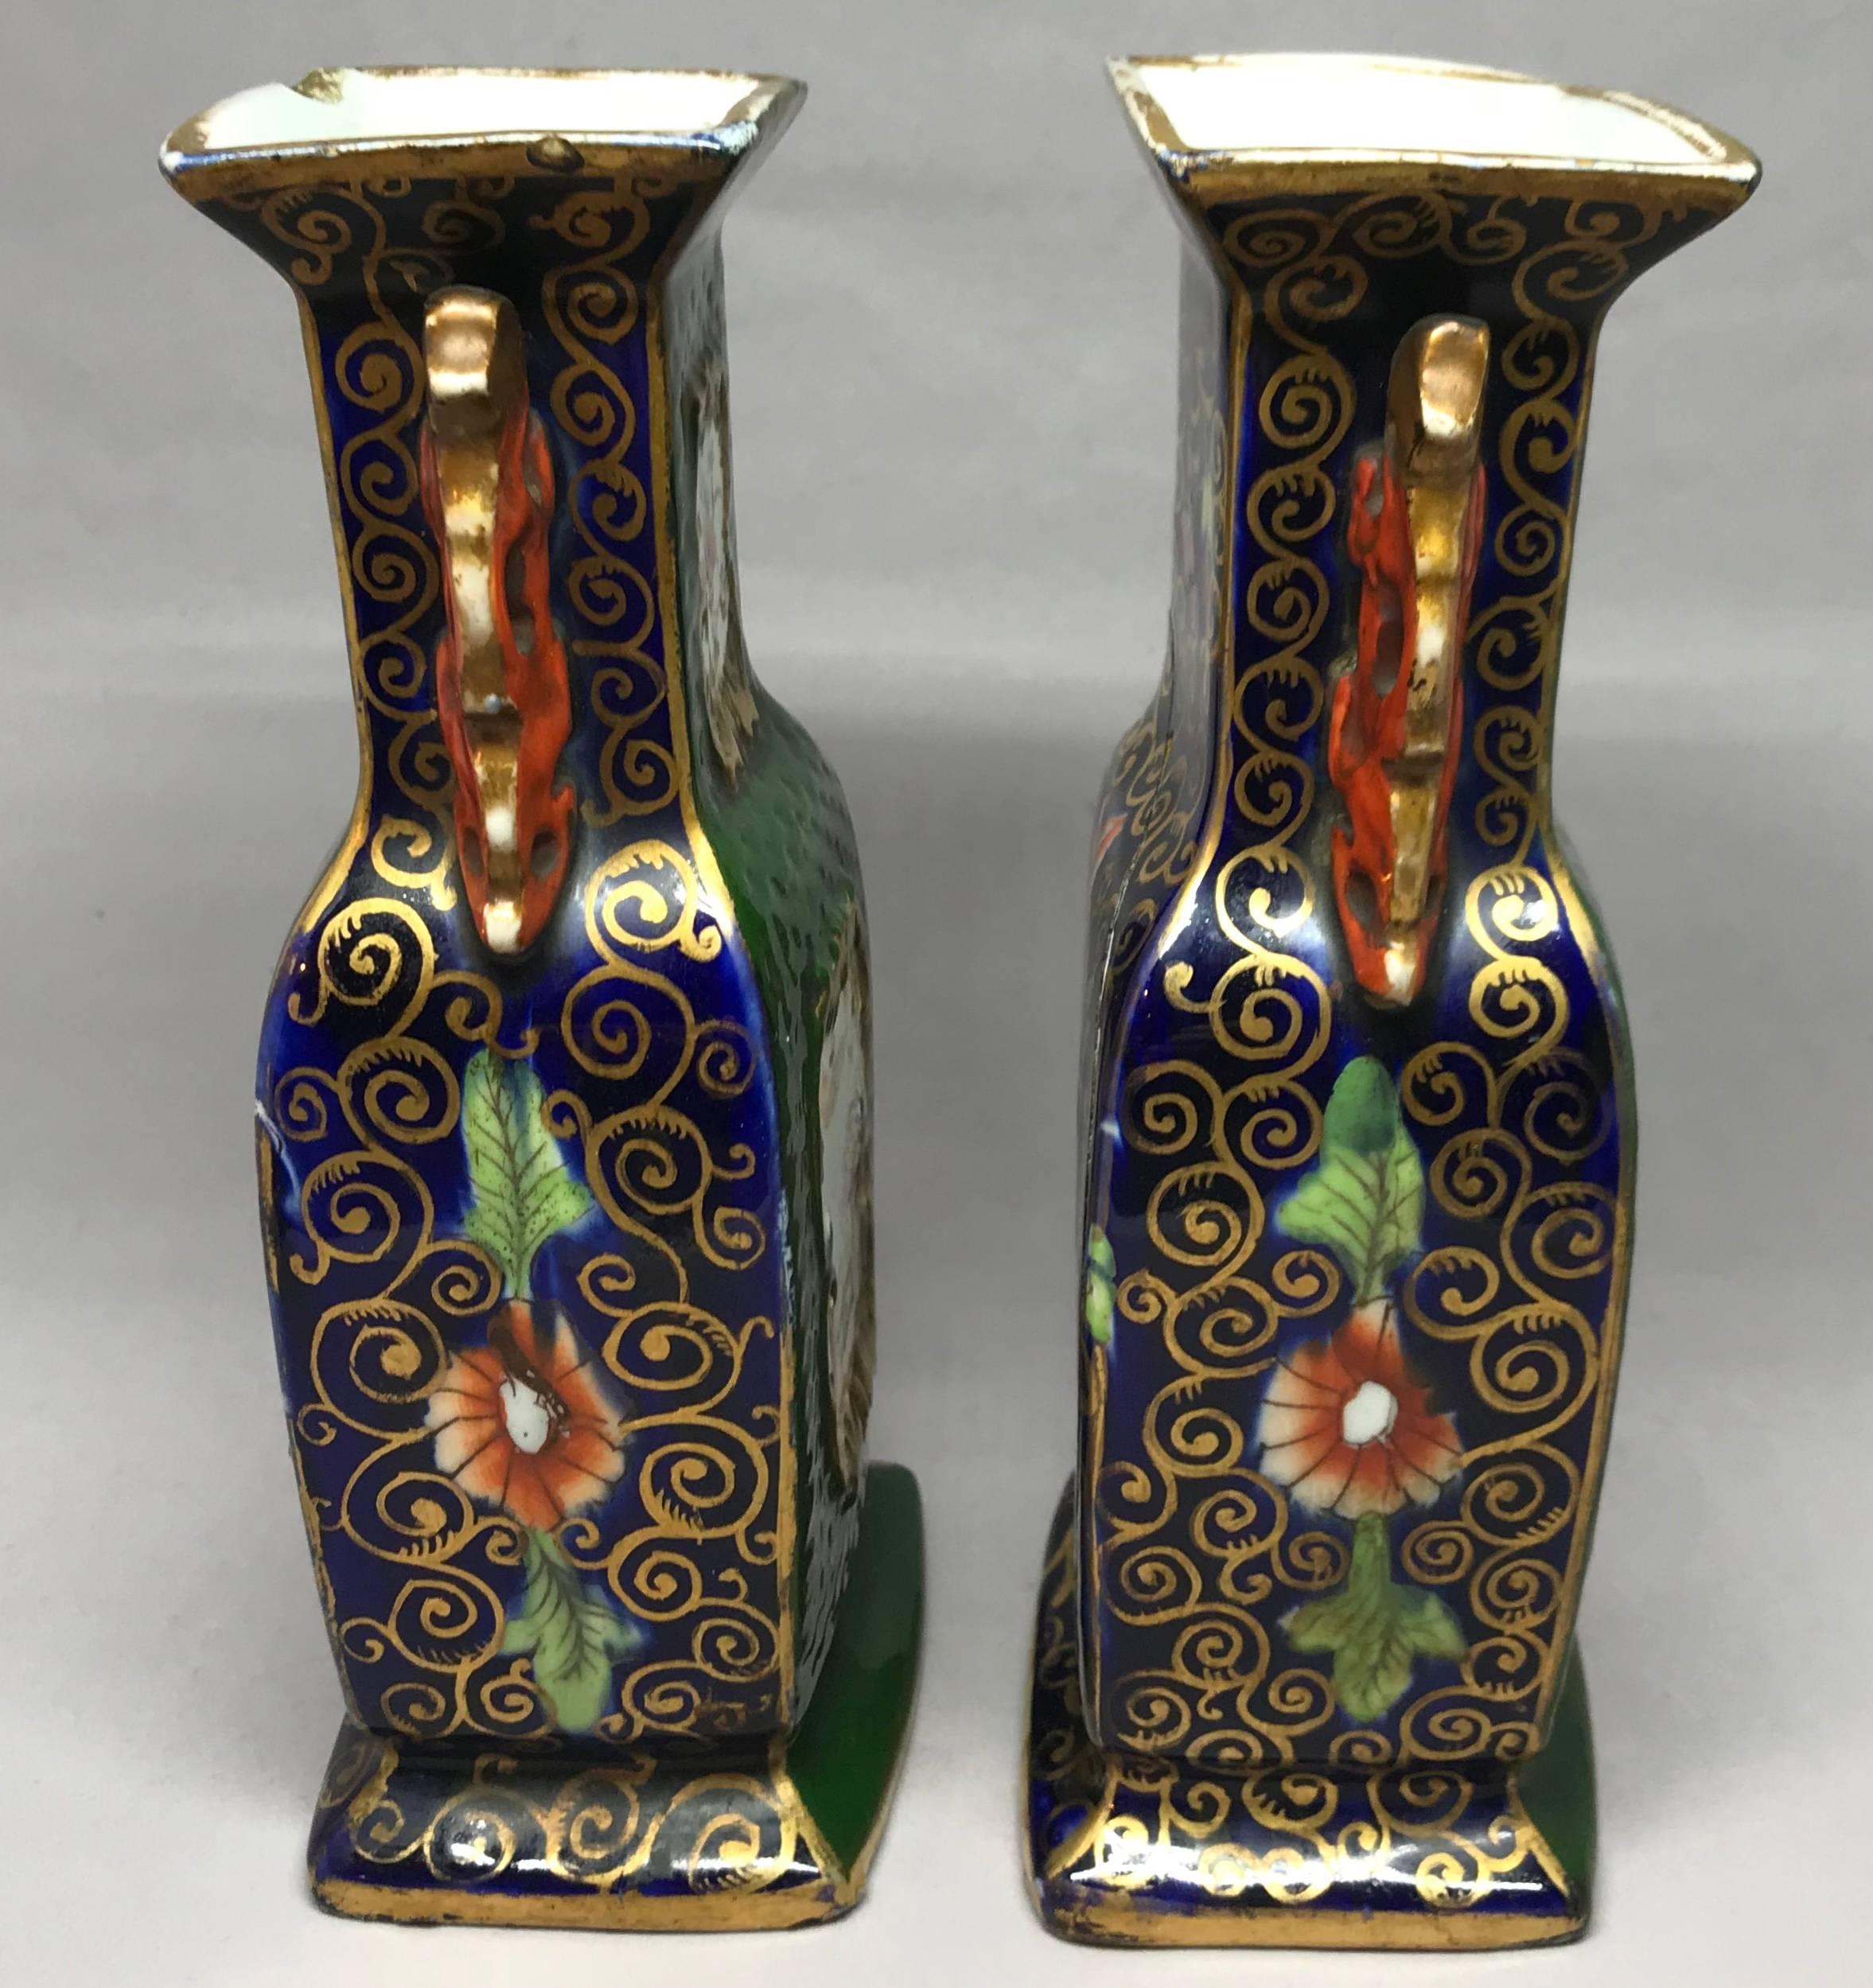 Pair of green English vases in the Chinese style. Vases in rich green and coral with chinoiserie scenes and floral design with cobalt and gilt ground on the reverse, England, circa 1815
Dimensions: 7.5